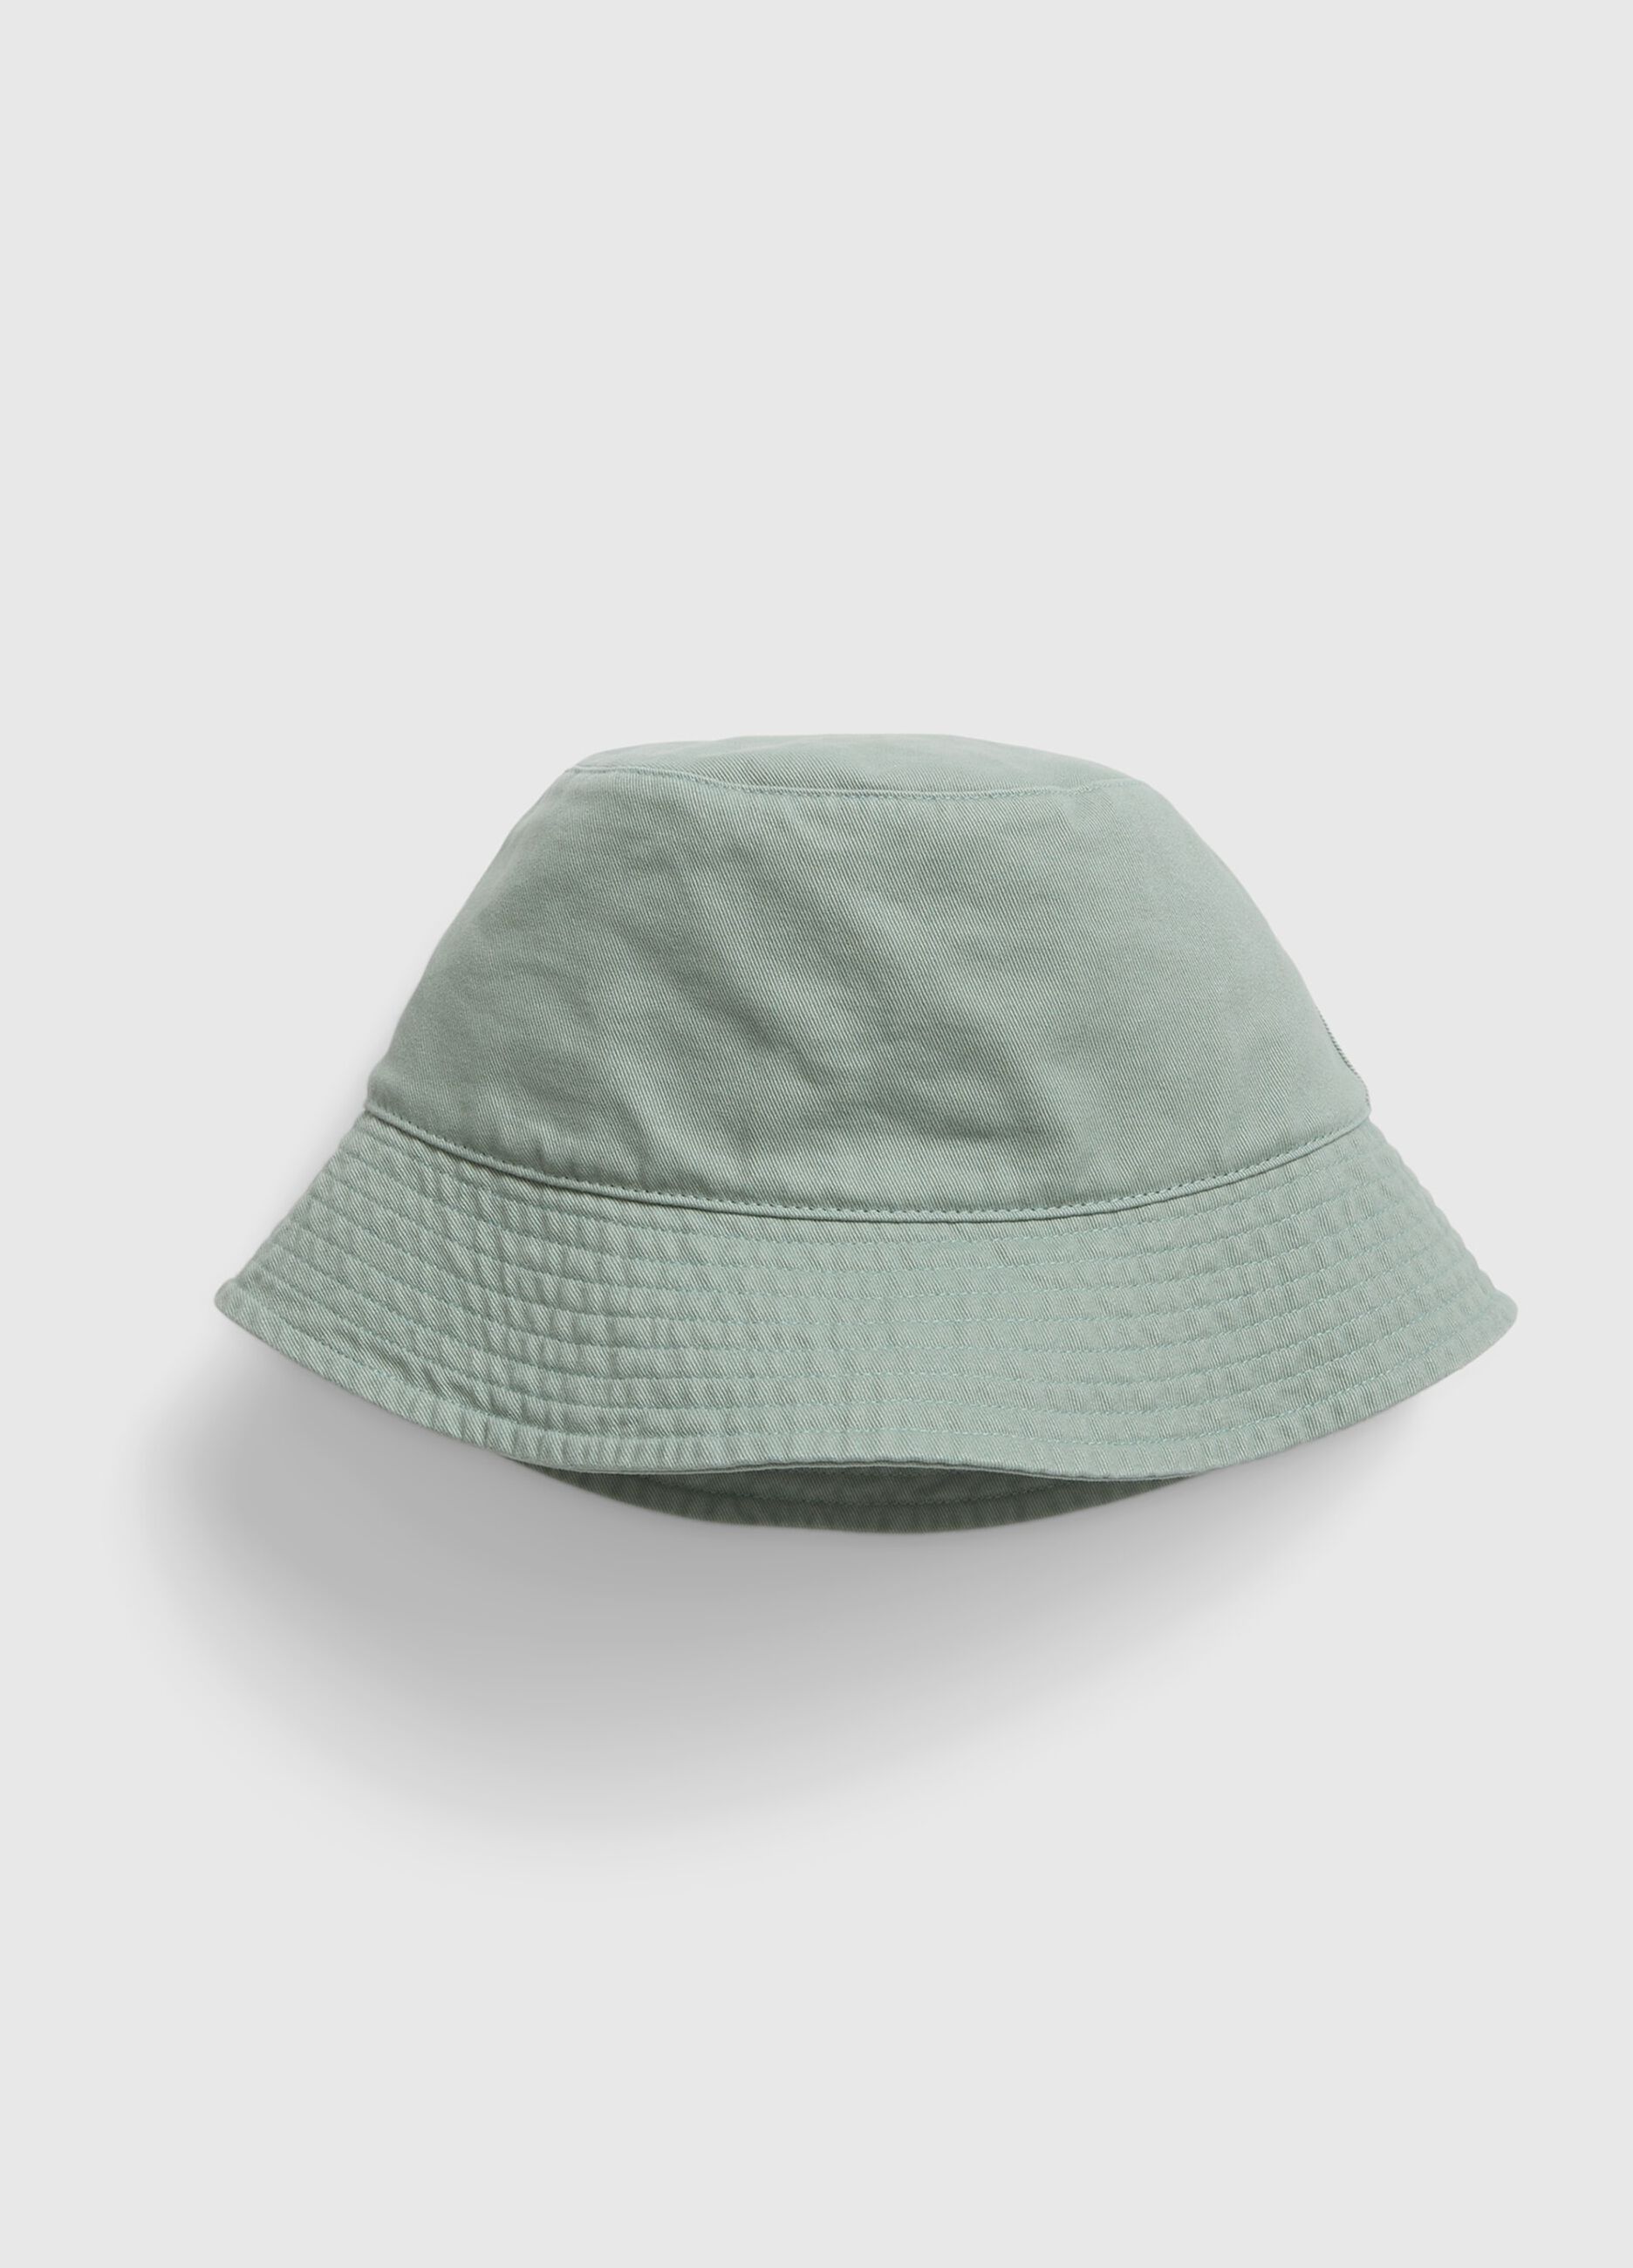 GAP Woman's Sage Green Fishing hat with logo embroidery